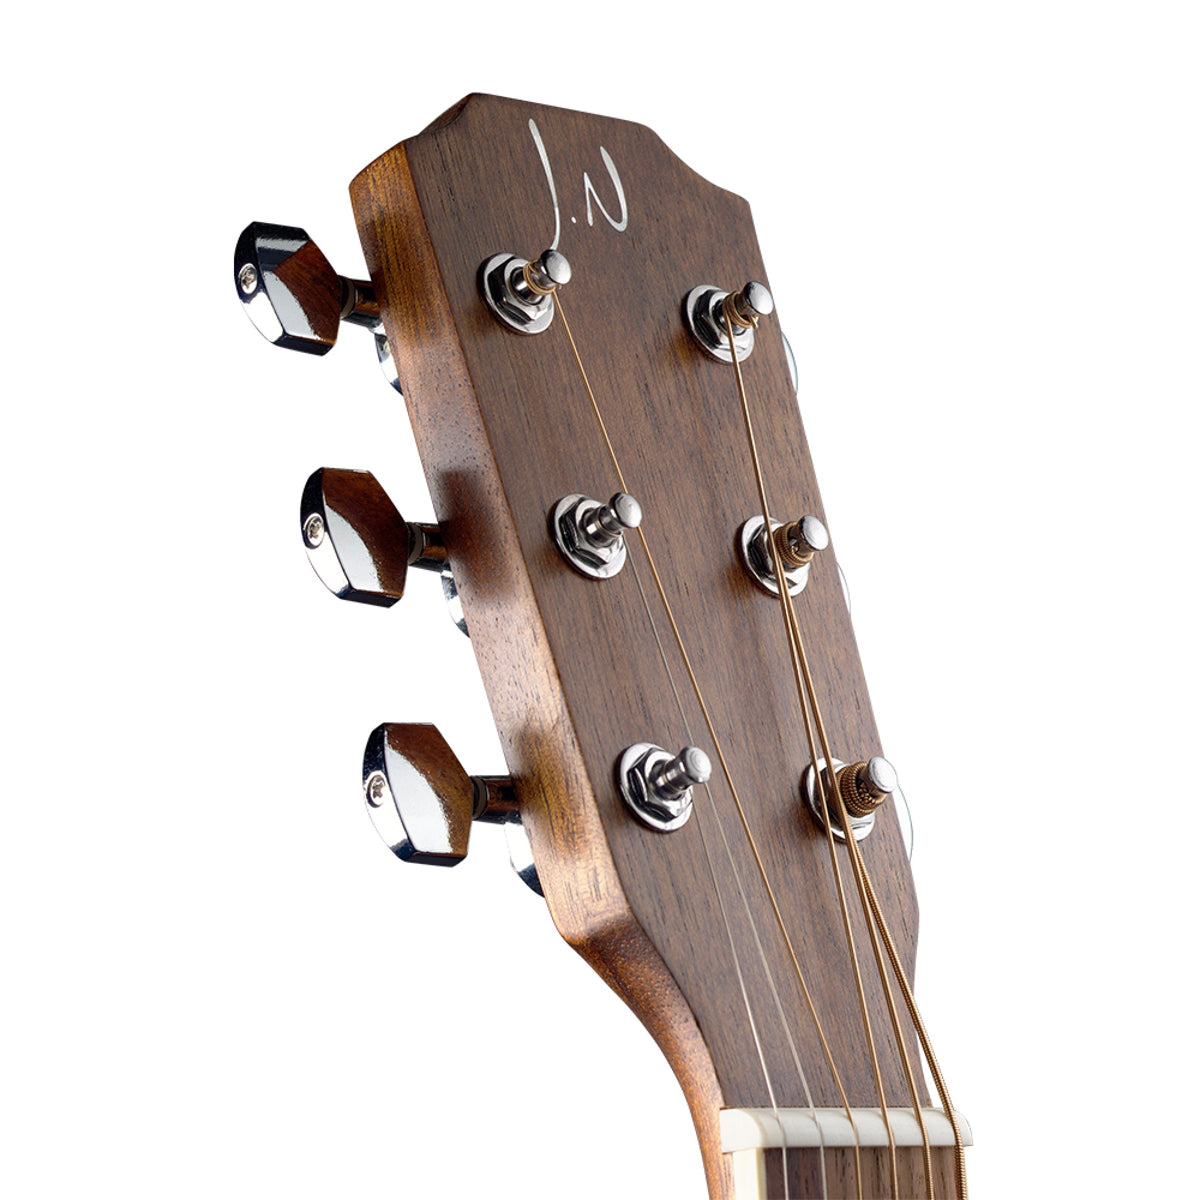 J.N Guitars Asyla Series ASY-A Acoustic Guitar in Natural (Left Handed)